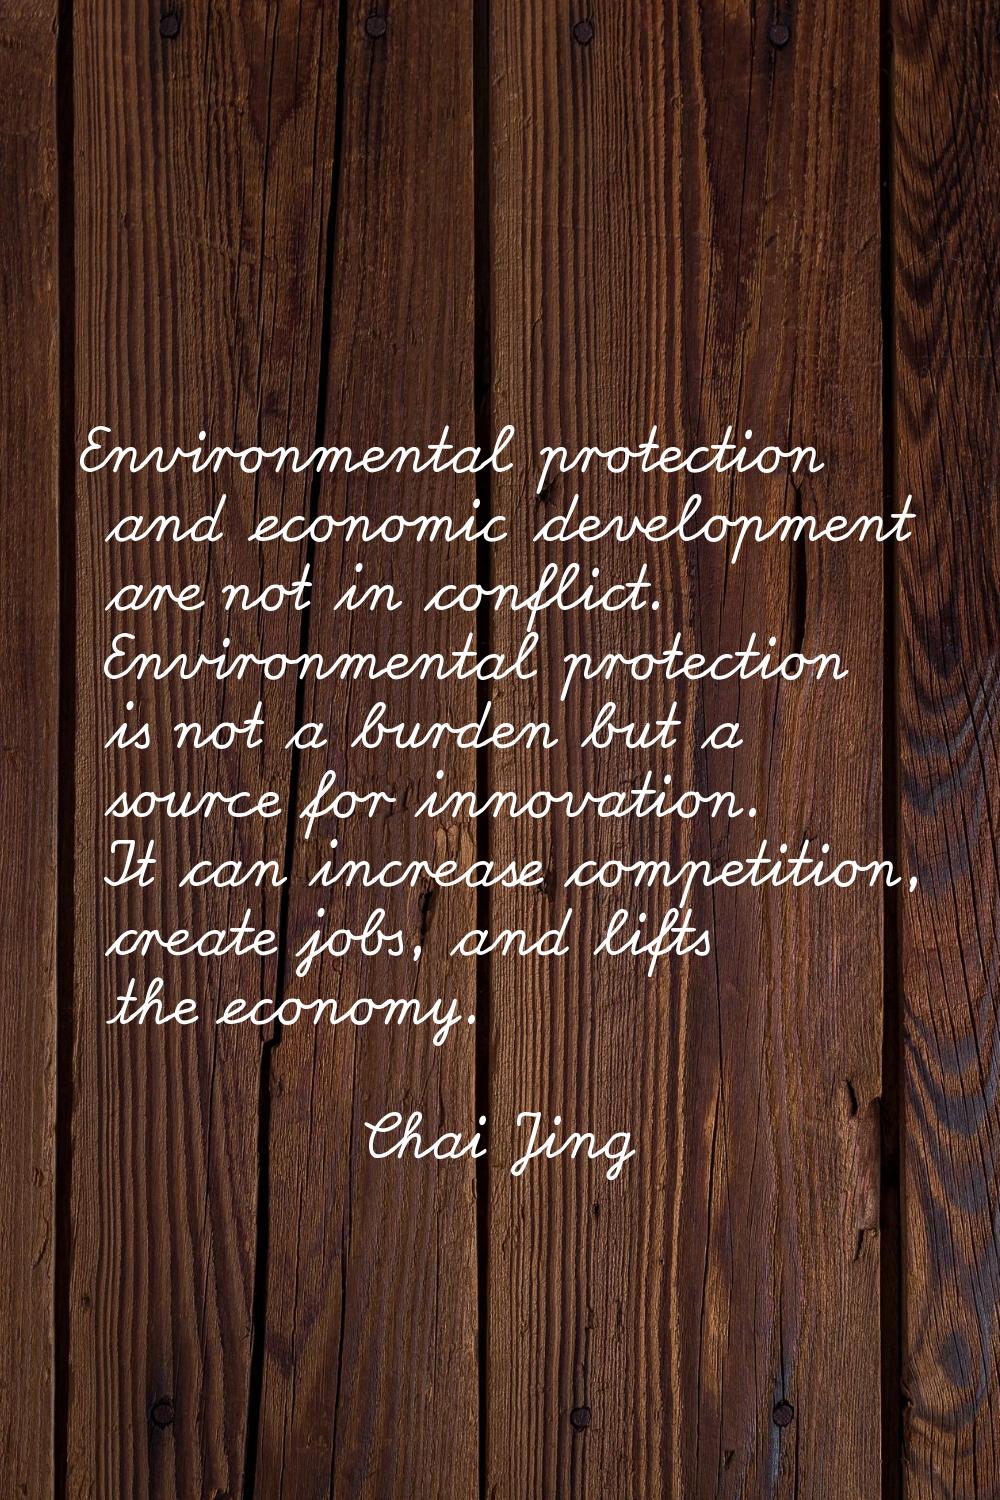 Environmental protection and economic development are not in conflict. Environmental protection is 